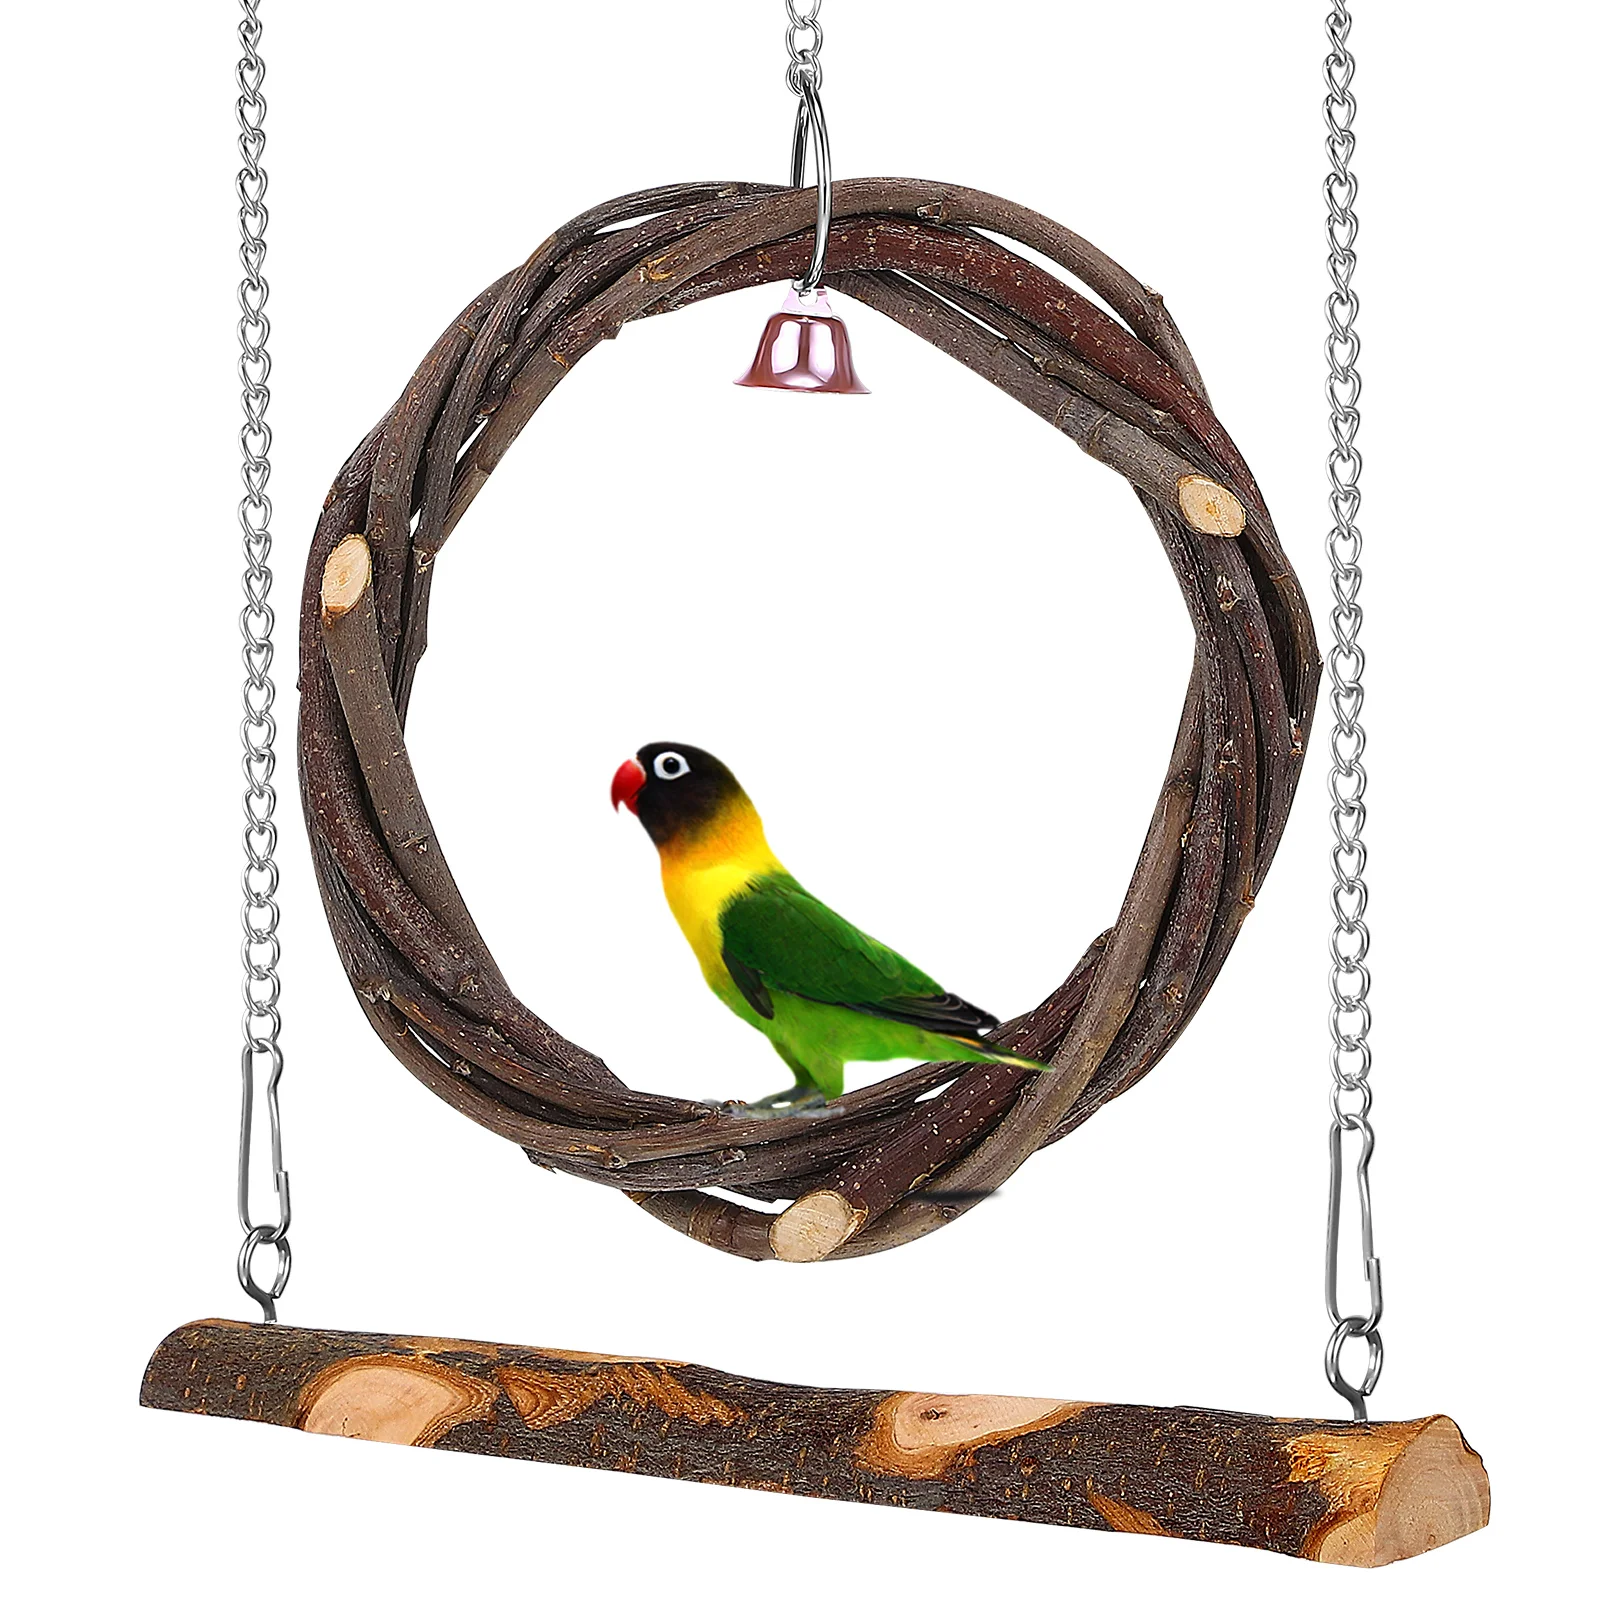 

2Pcs Natural Wooden Pet Bird Swing Perch Parrot Chewing Swing Toy Cage Accessories for Small Sized Birds